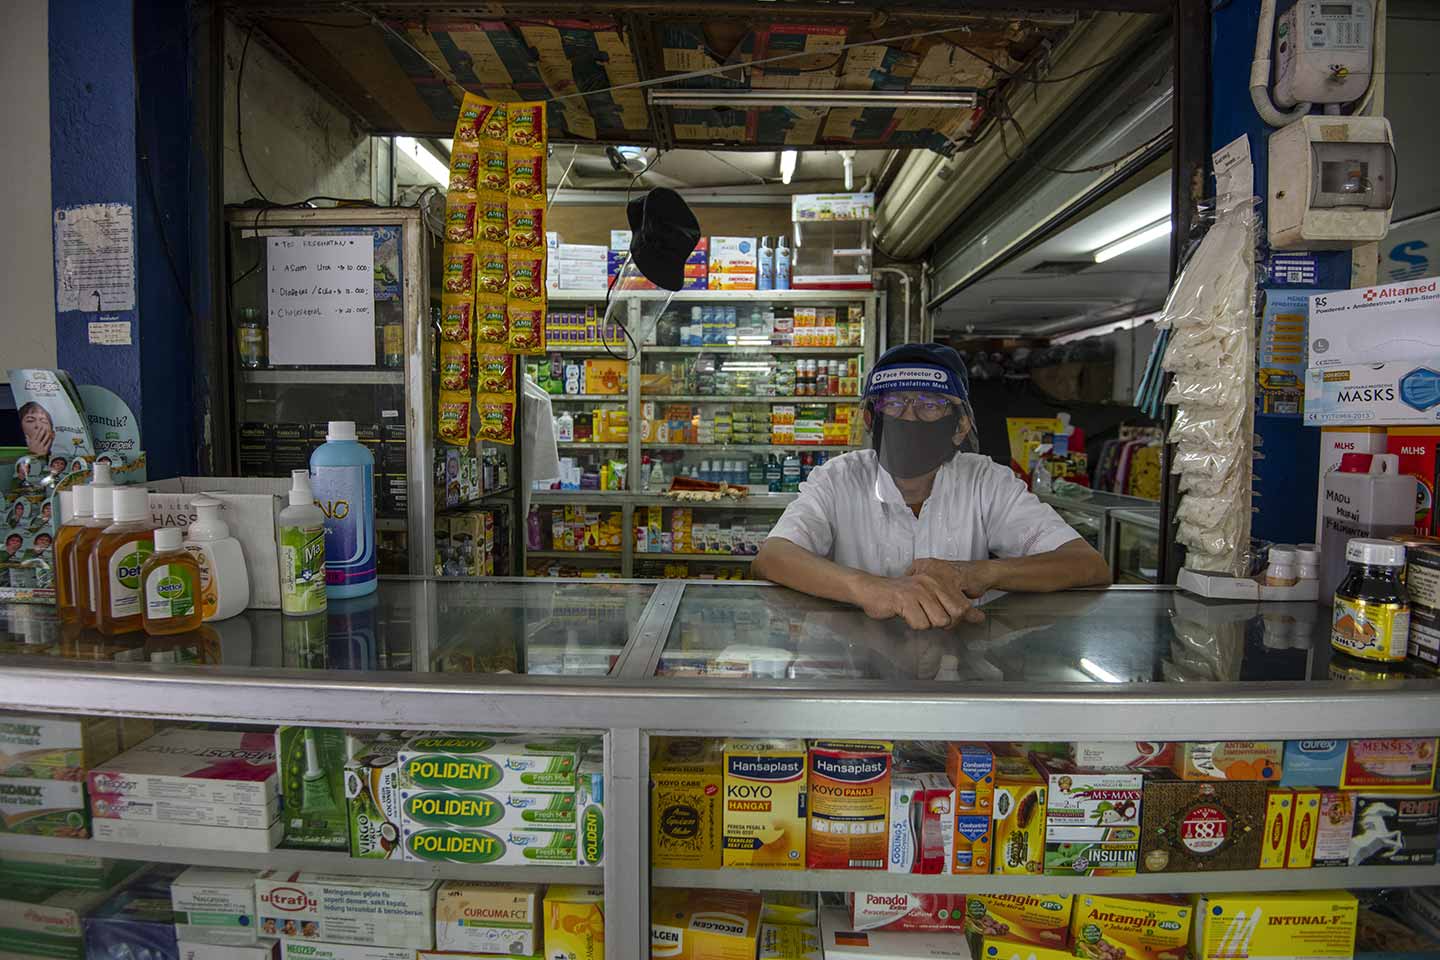 Drugstore owners serve shoppers by wearing masks and face protector during the Covid-19 outbreak in South Jakarta, Indonesia on April, 2020.  Credit: UNICEF/2020/Arimacs Wilander